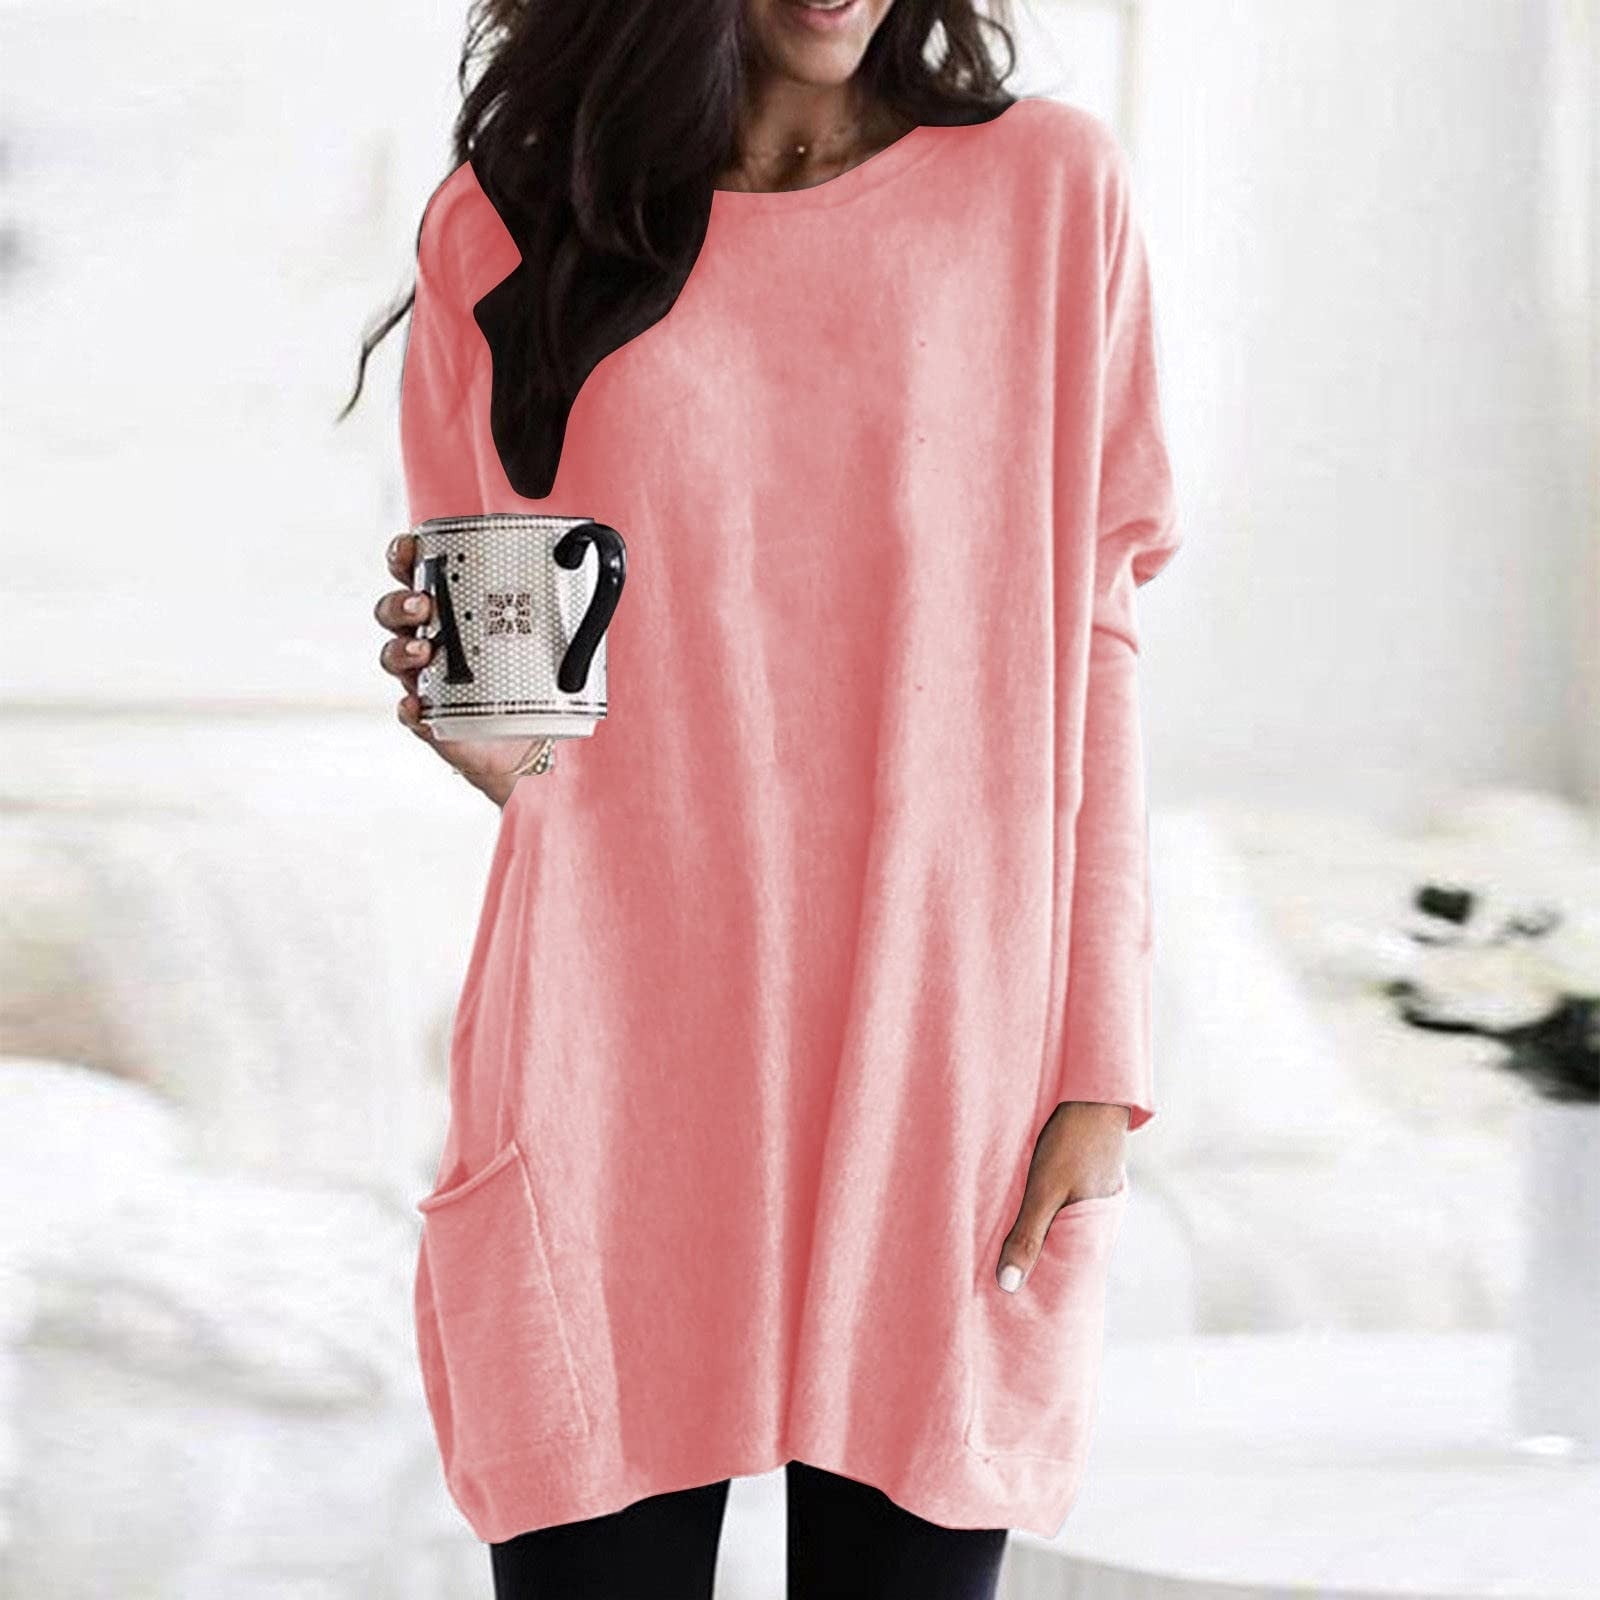 Comfy Dressy Tunic Tops to Wear with Leggings Round Neck Gradient Ombre  Flowy Hide Belly Long Shirt Plus Size Tops for Women Long Sleeve Shirts Hot  Pink XXL 